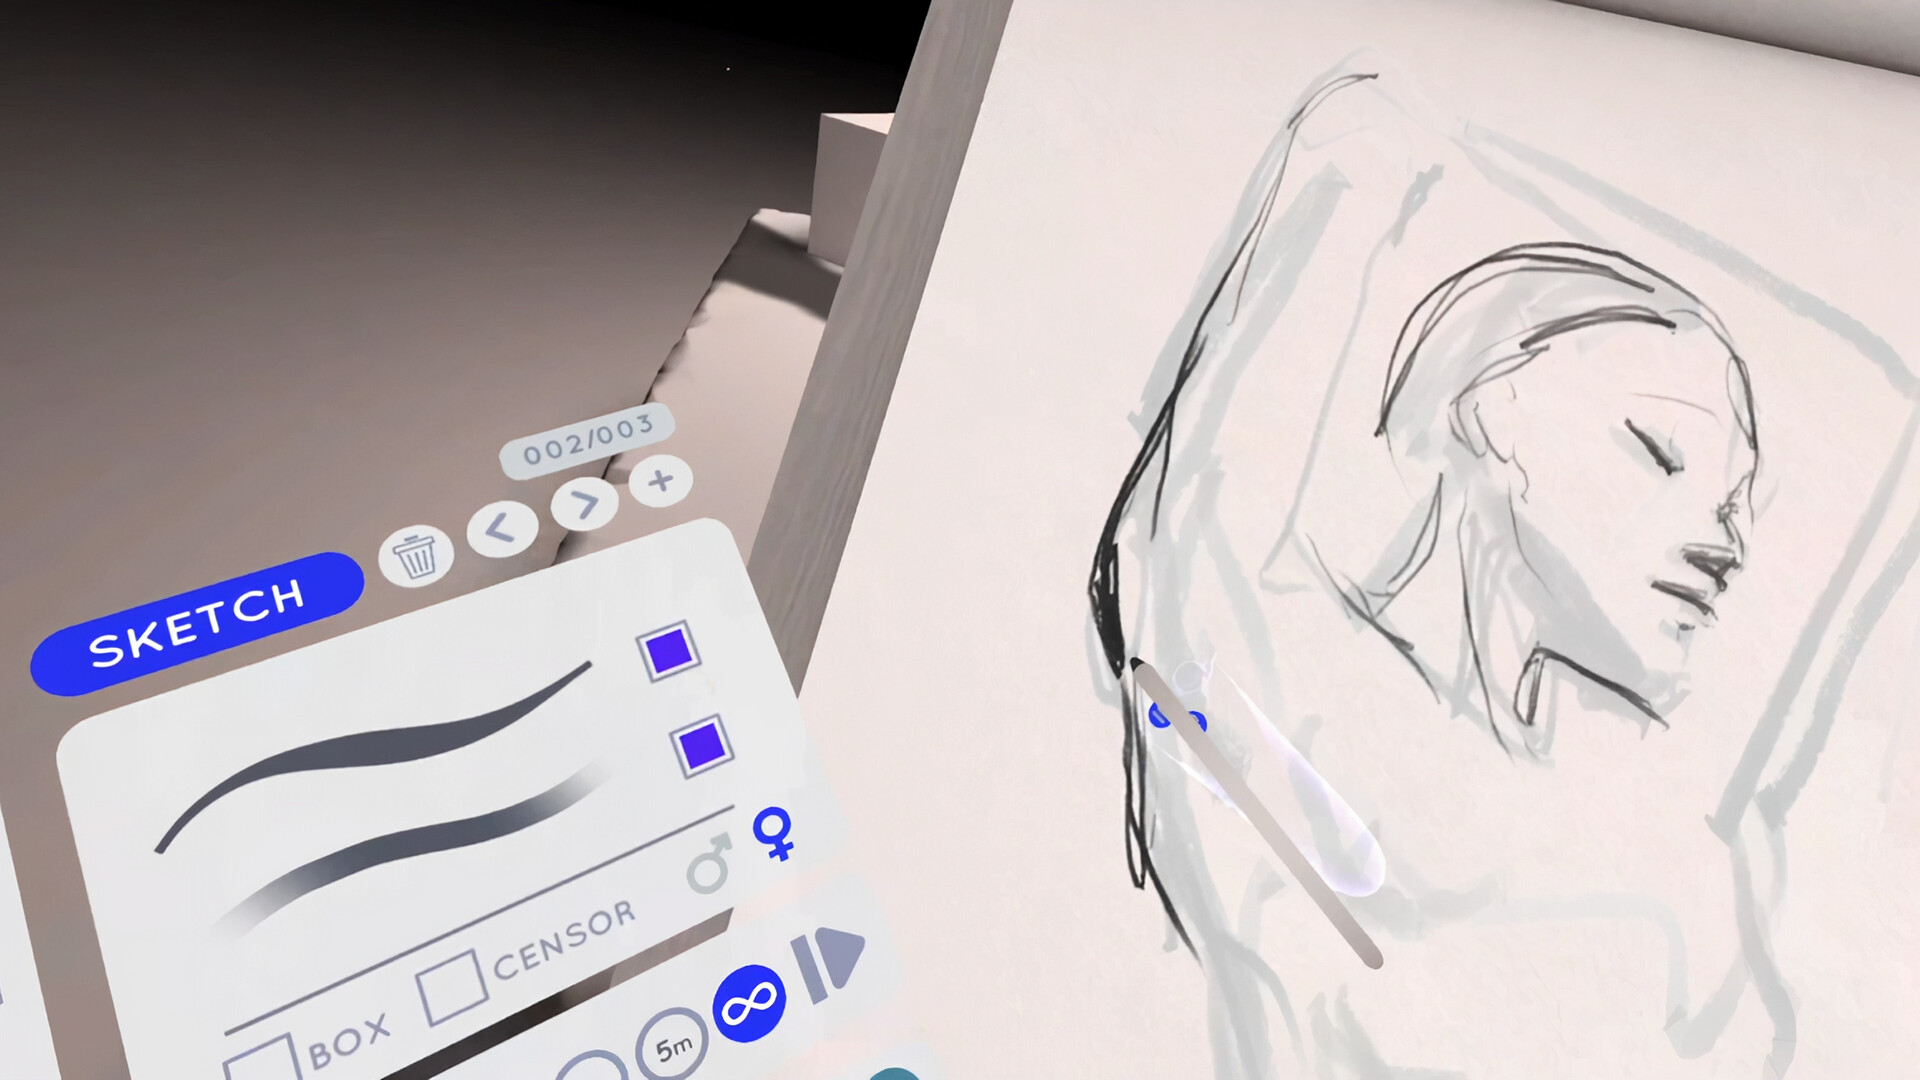 Multiplayer VR Drawing App Gesture VR Aims to Make You a Better Artist